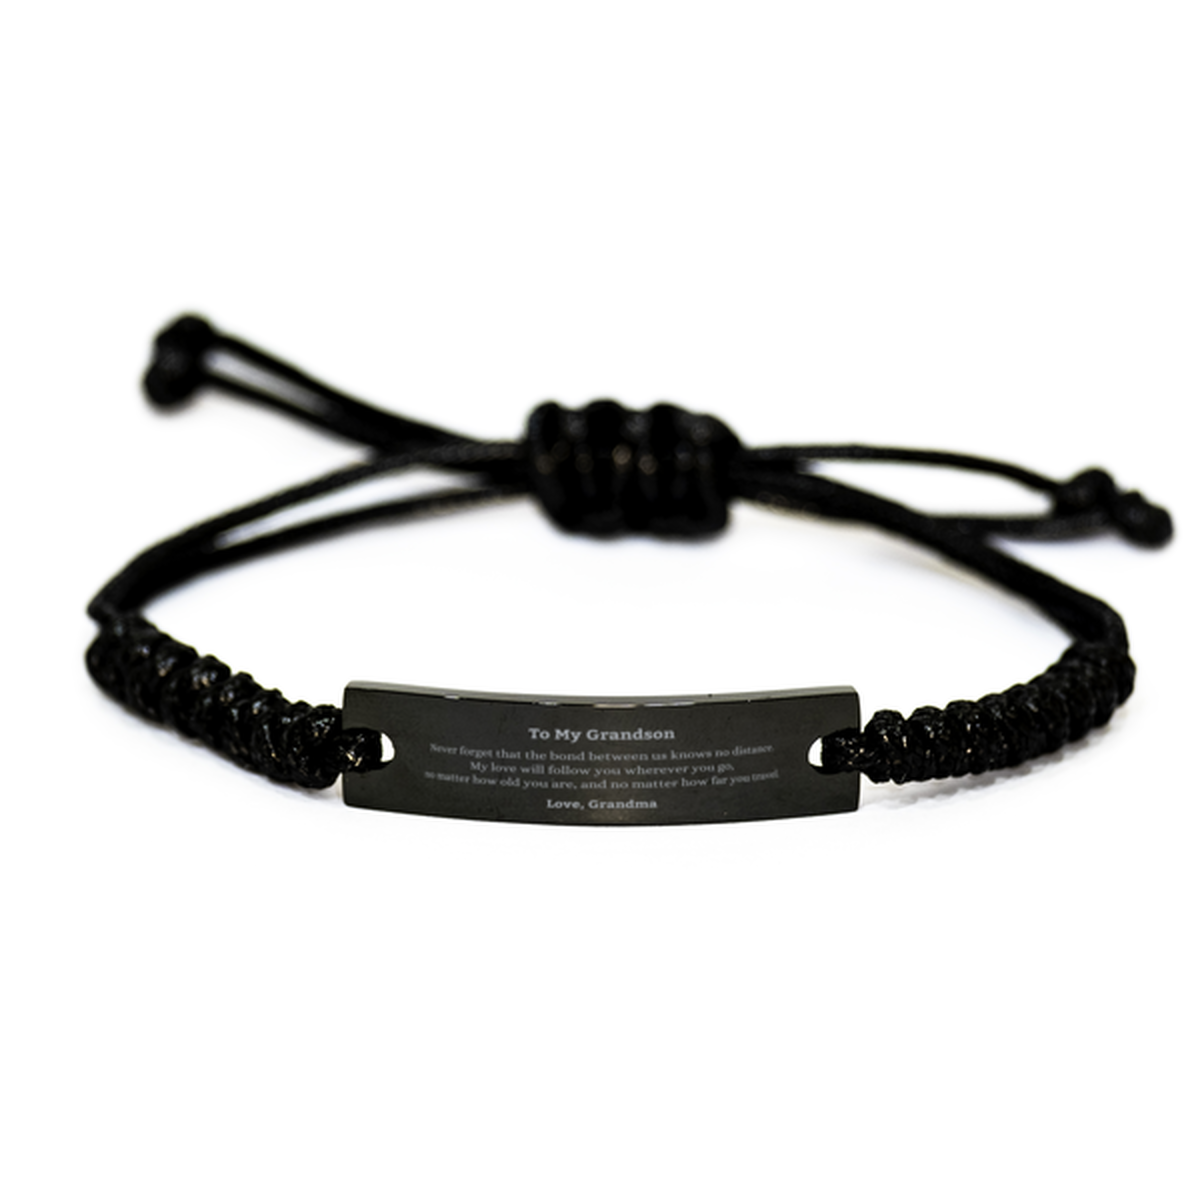 Grandson Birthday Gifts from Grandma, Adjustable Black Rope Bracelet for Grandson Christmas Graduation Unique Gifts Grandson Never forget that the bond between us knows no distance. Love, Grandma